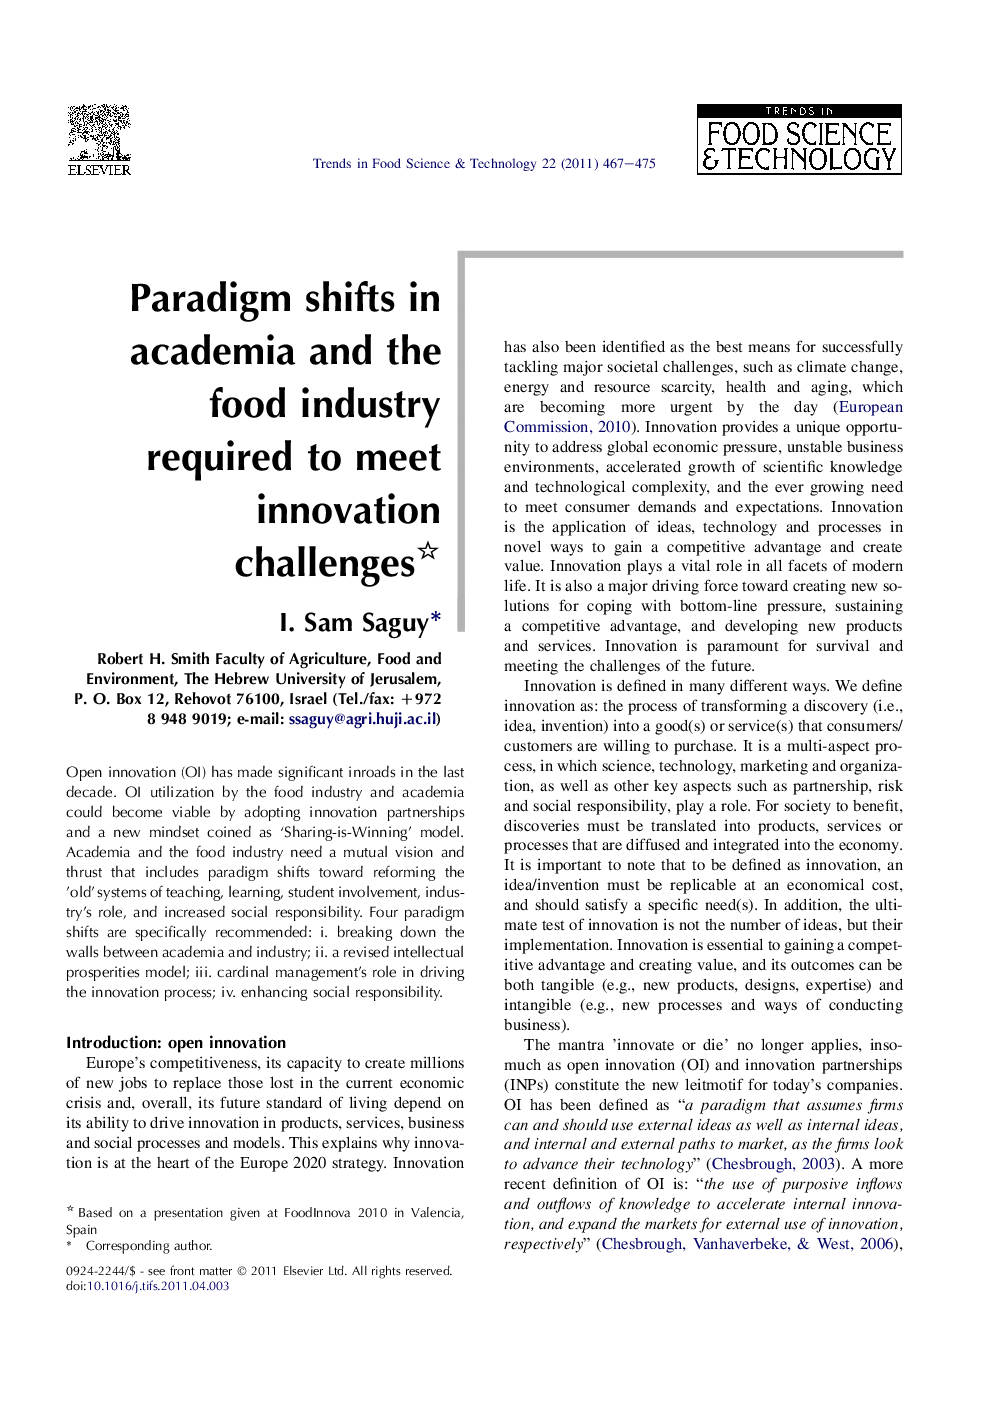 Paradigm shifts in academia and the food industry required to meet innovation challenges 